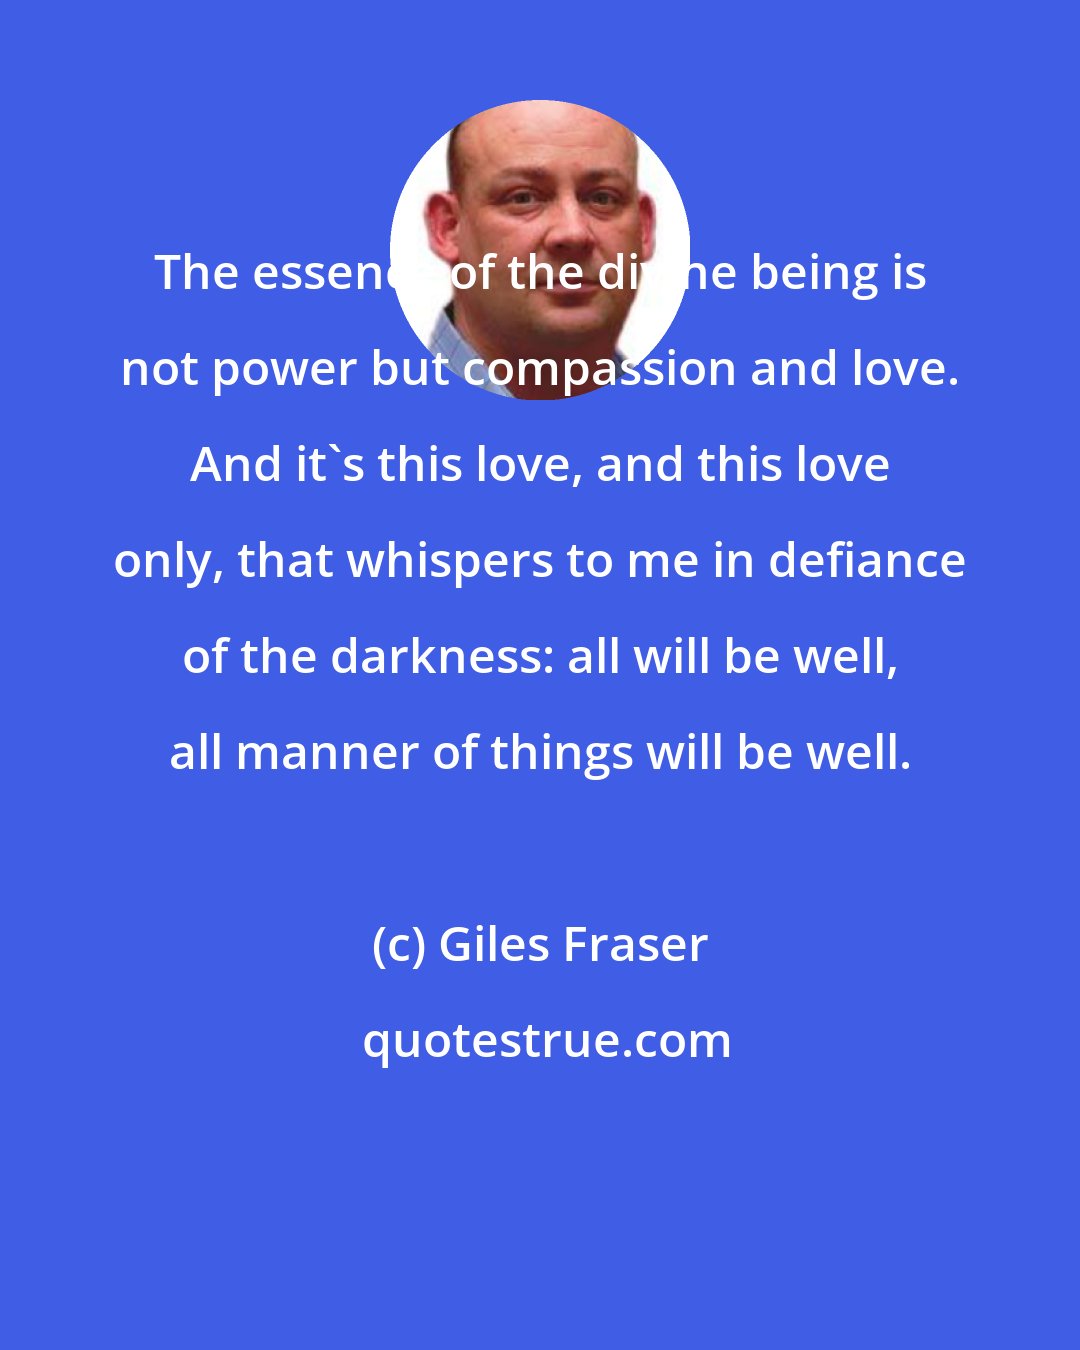 Giles Fraser: The essence of the divine being is not power but compassion and love. And it's this love, and this love only, that whispers to me in defiance of the darkness: all will be well, all manner of things will be well.